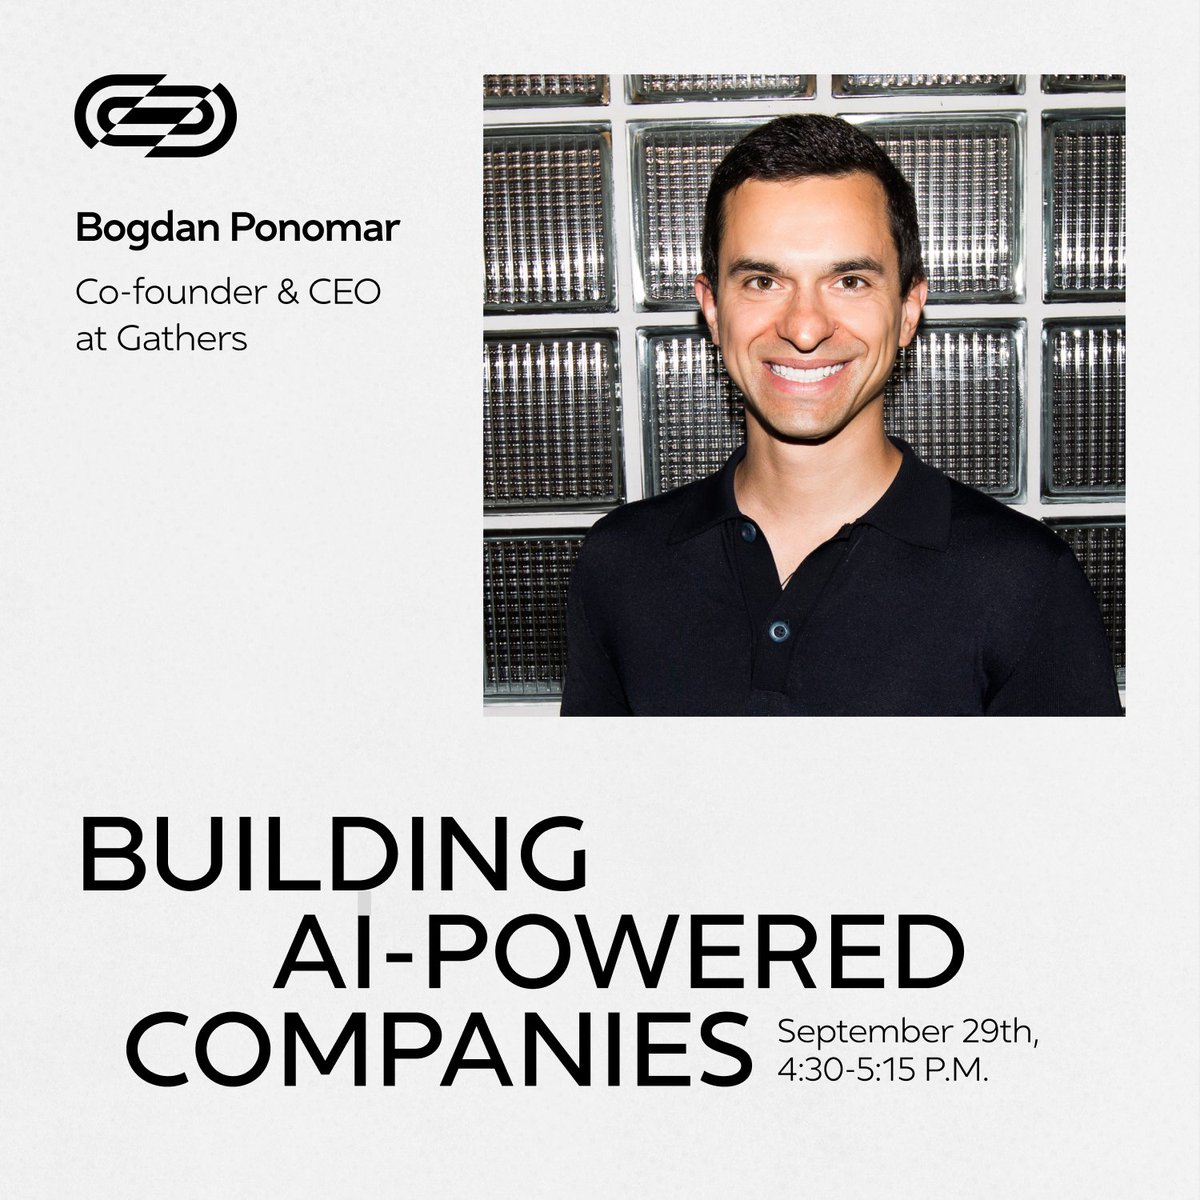 Next Friday, @BPonomar, co-founder and CEO at Gathers and Board Member at @AIHouse_Ukraine, will deliver a speech on 'Building AI-Powered Companies' during the @itarenaua tech track.

Valuable insights in software development, business strategy, and community building,